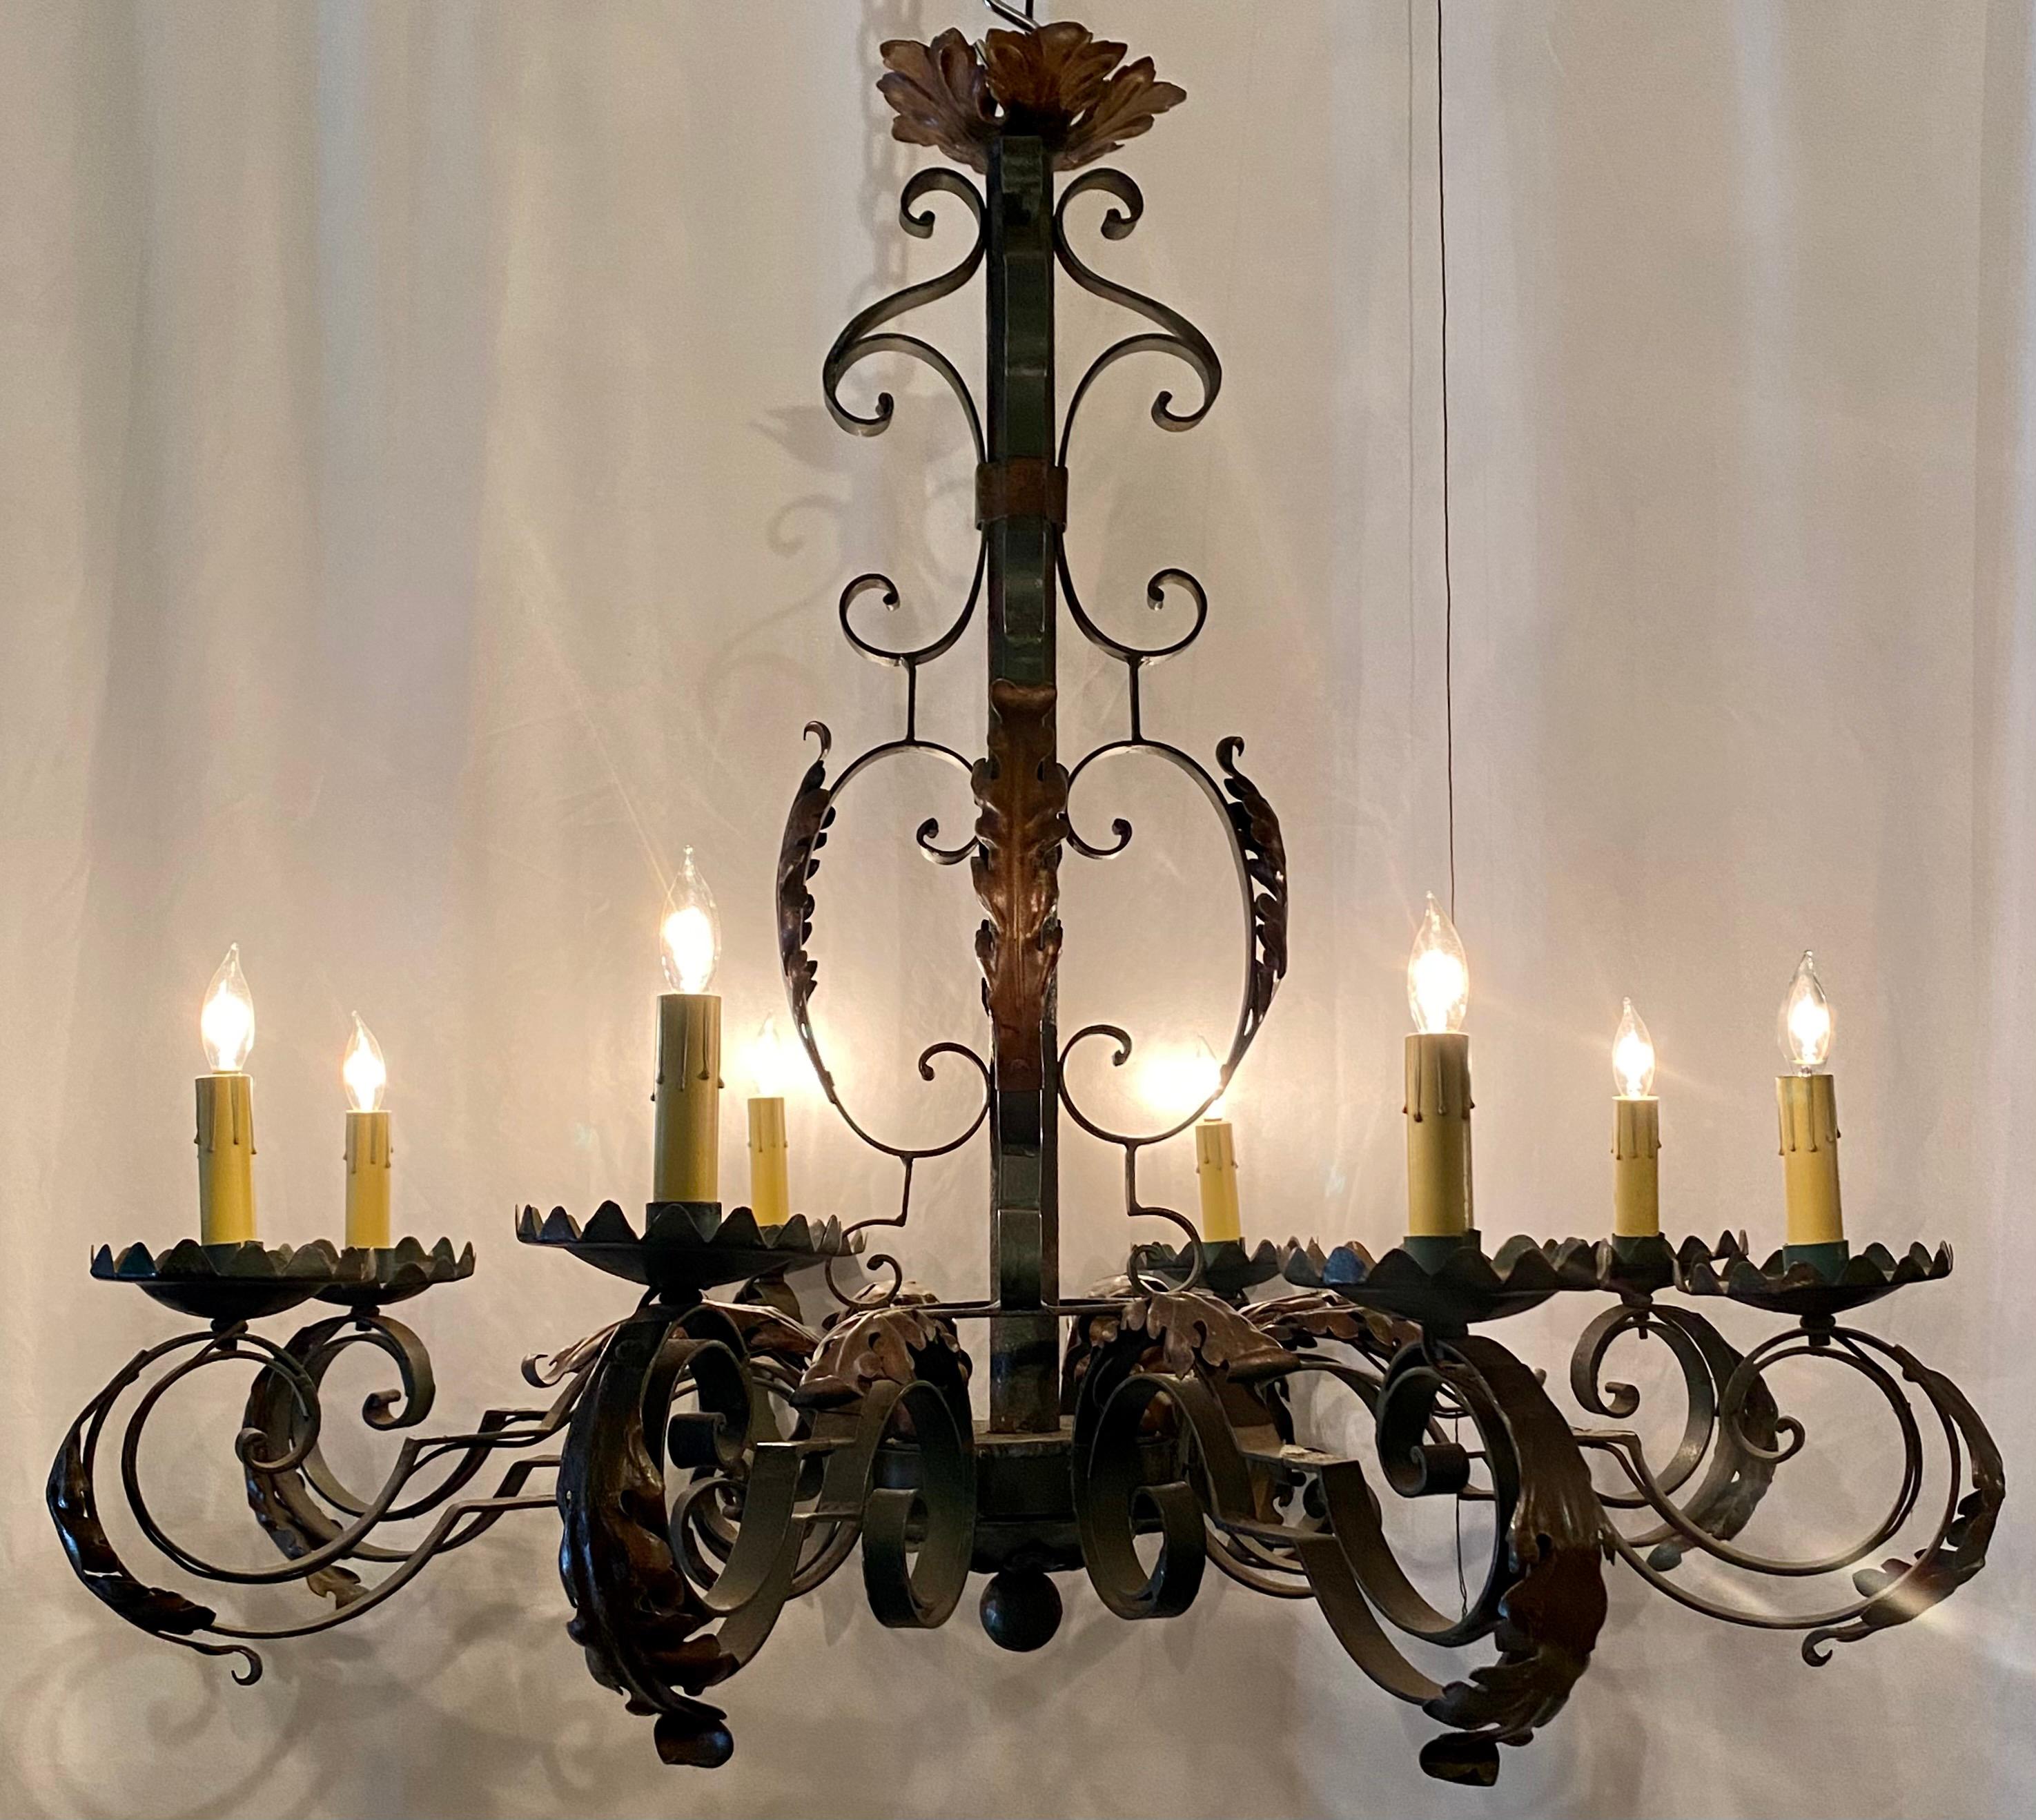 Antique French old iron tavern chandelier with 8 lights, Circa 1890-1910.
ICH147.